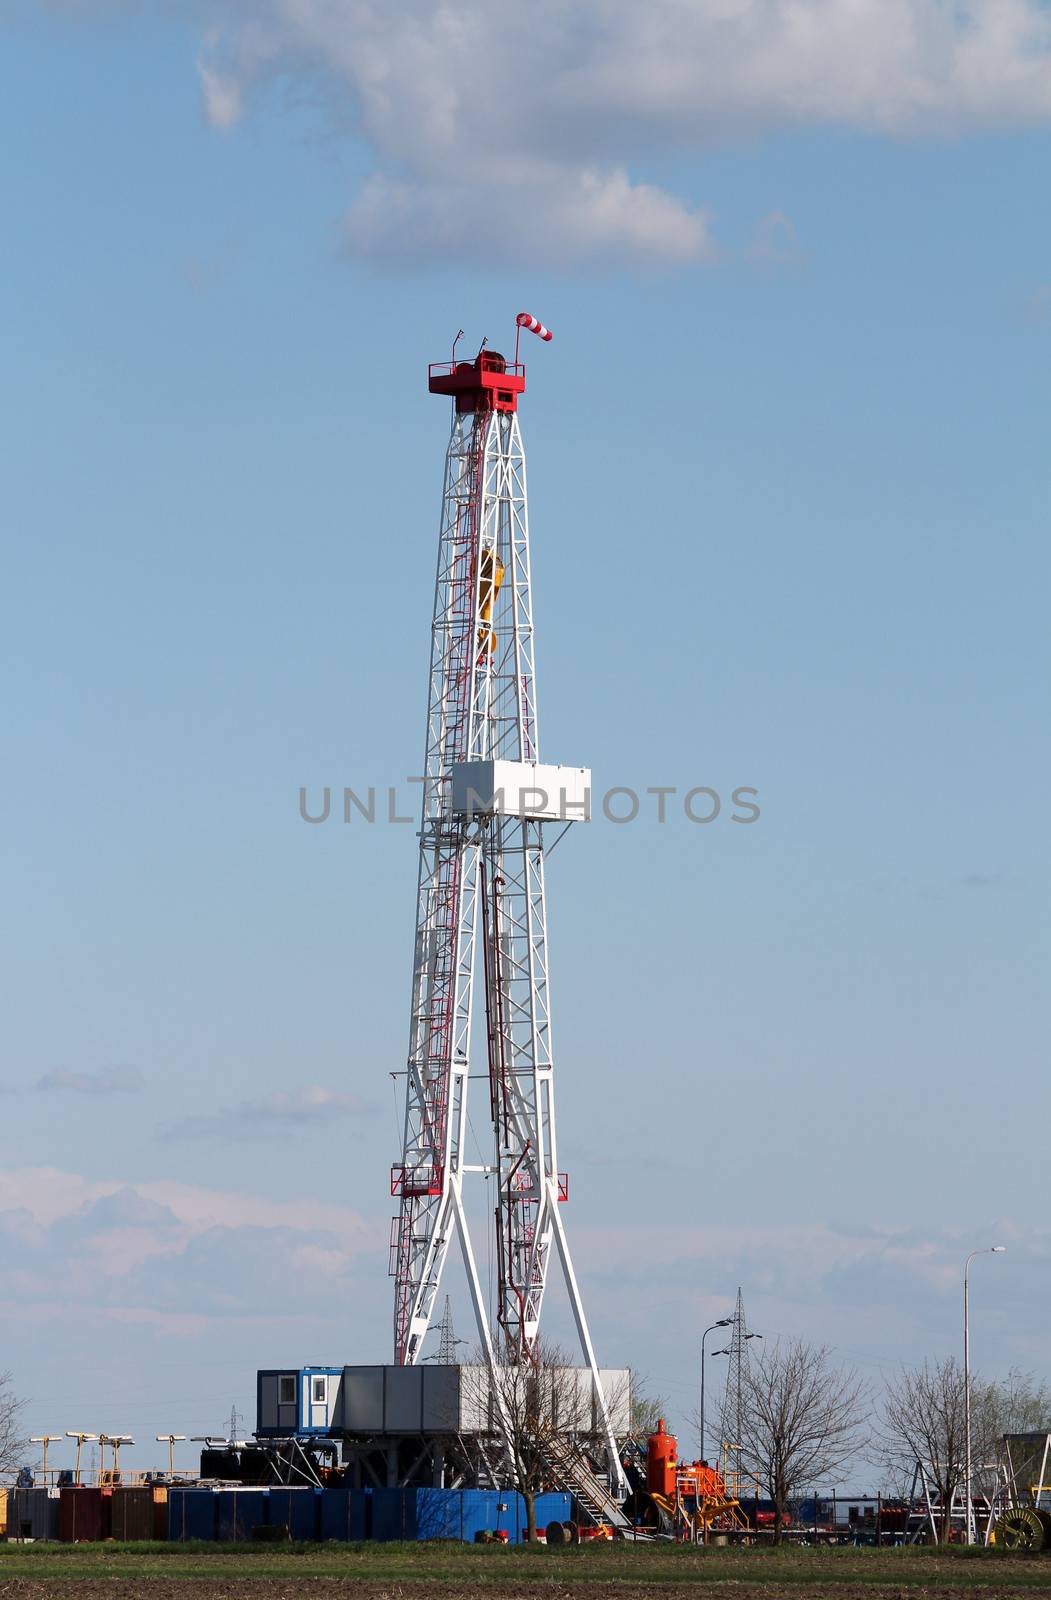 land oil drilling rig on field